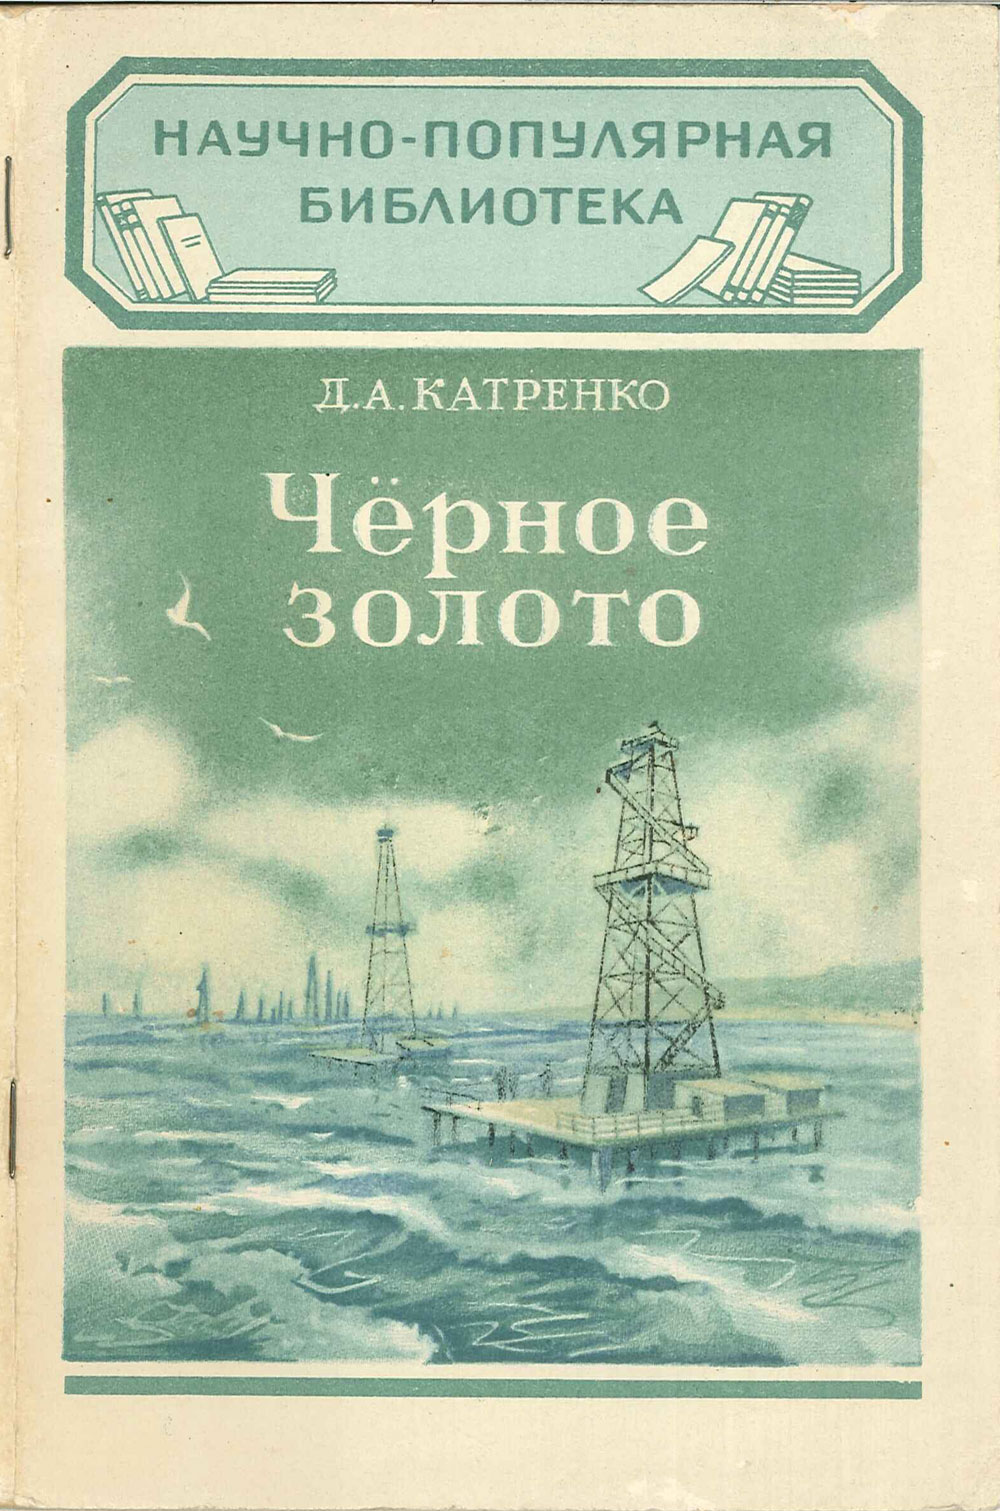 The cover of the school library book from 1949 mentioning Mepisov’s innovation of the cementing of boreholes. A nice example of school book from the Stalin era when you had to assert the Soviet Union’s leading position in all areas from industry to science.